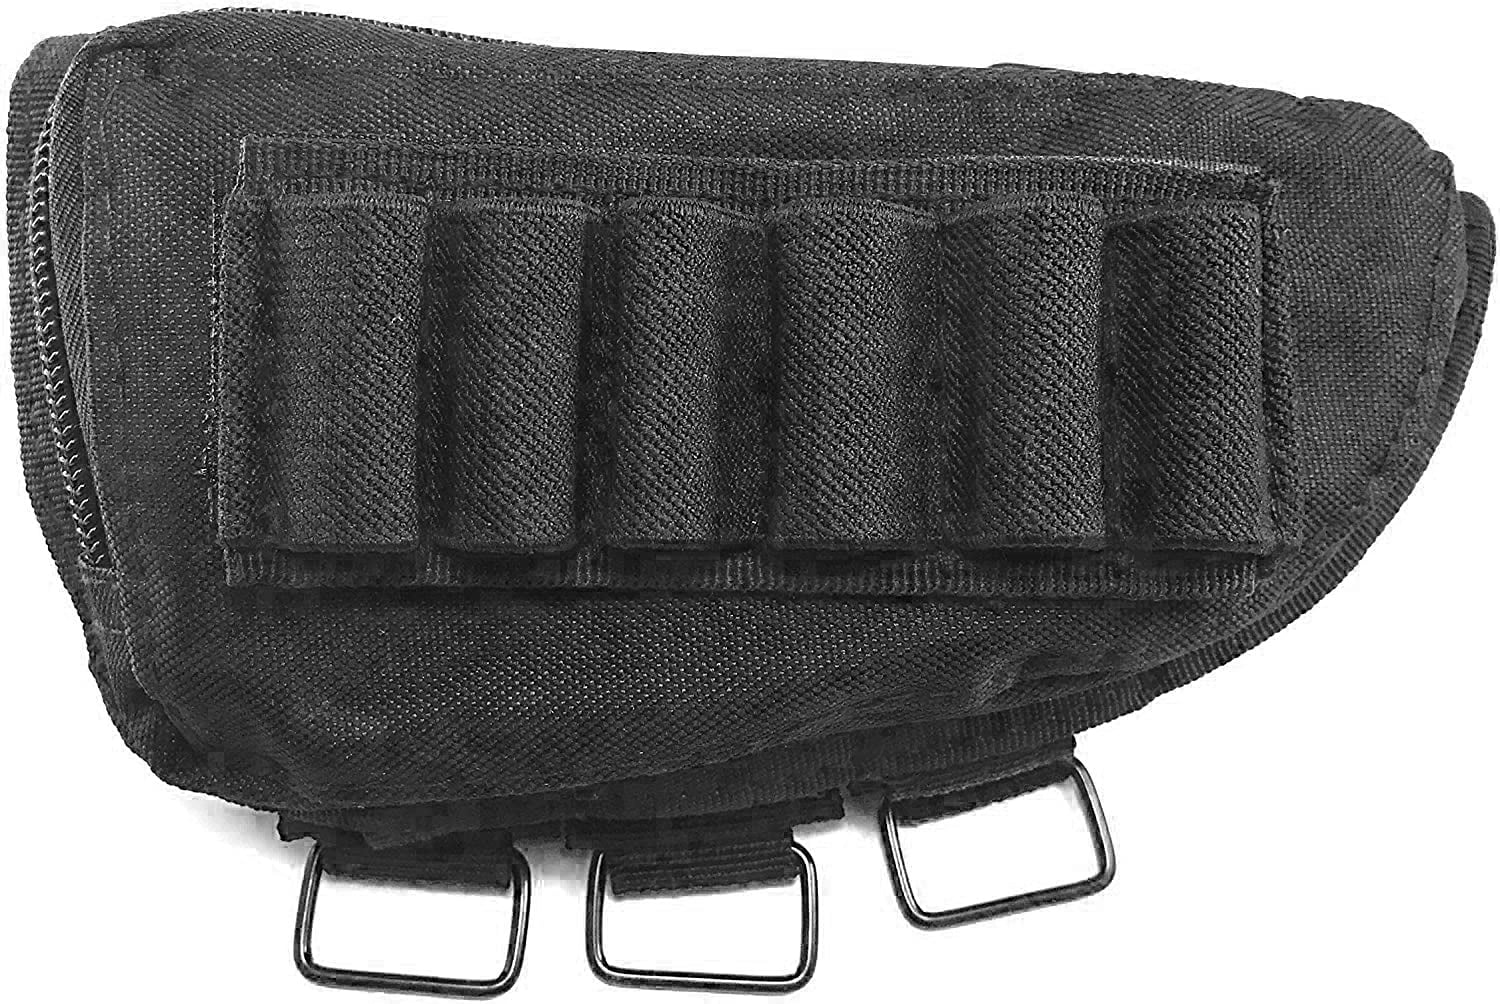 Hunters Specialties Ammo Holder Pouch Comfortable Black Case Perfect Fit Safe 